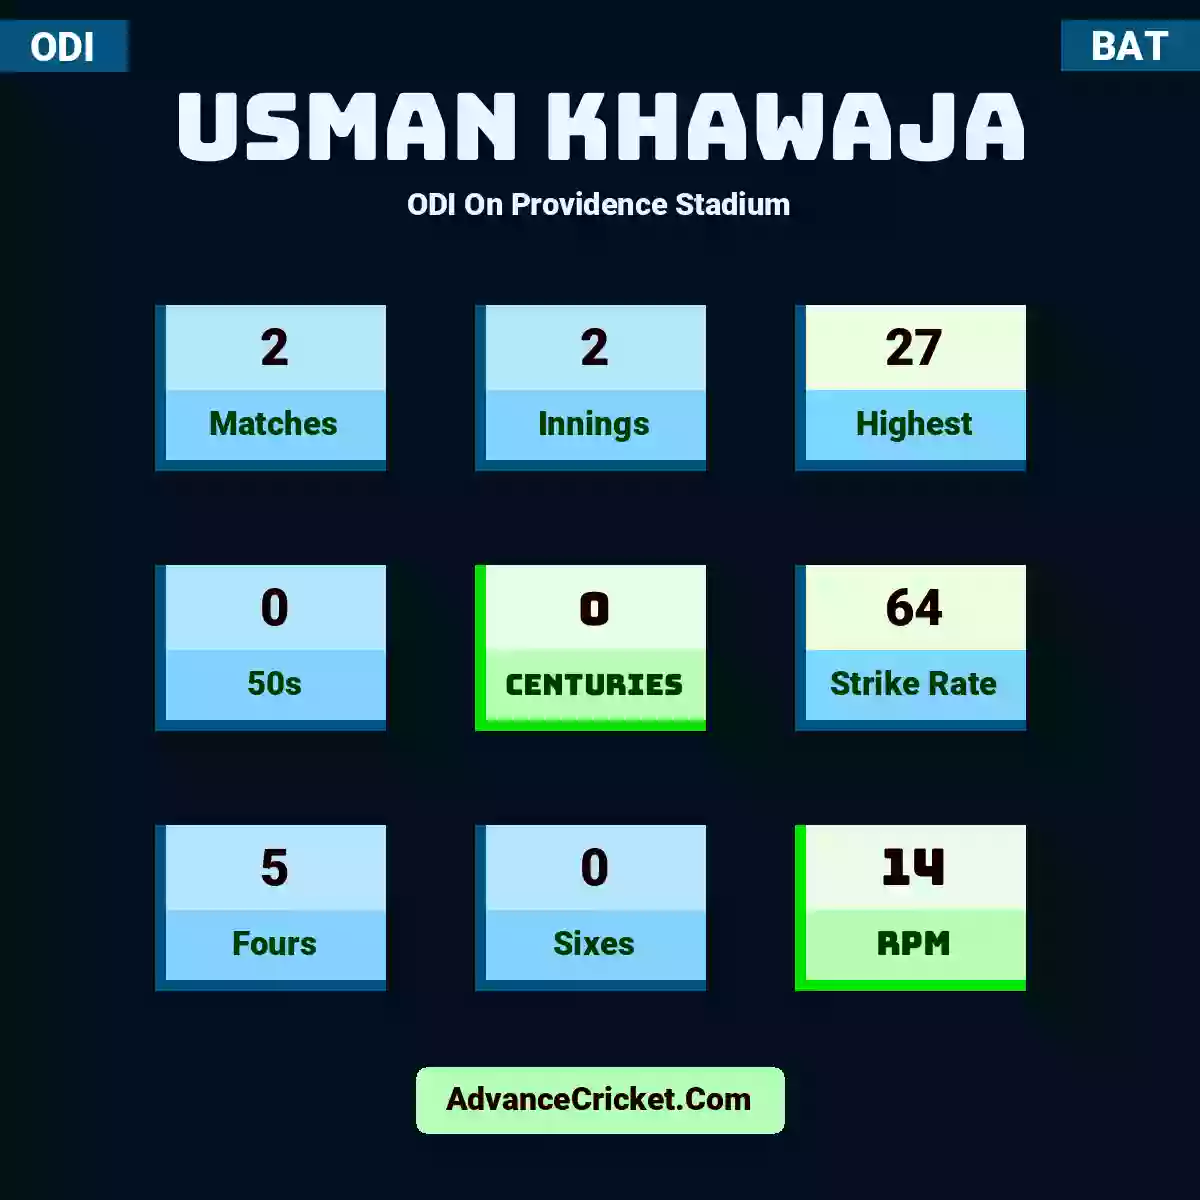 Usman Khawaja ODI  On Providence Stadium, Usman Khawaja played 2 matches, scored 27 runs as highest, 0 half-centuries, and 0 centuries, with a strike rate of 64. U.Khawaja hit 5 fours and 0 sixes, with an RPM of 14.